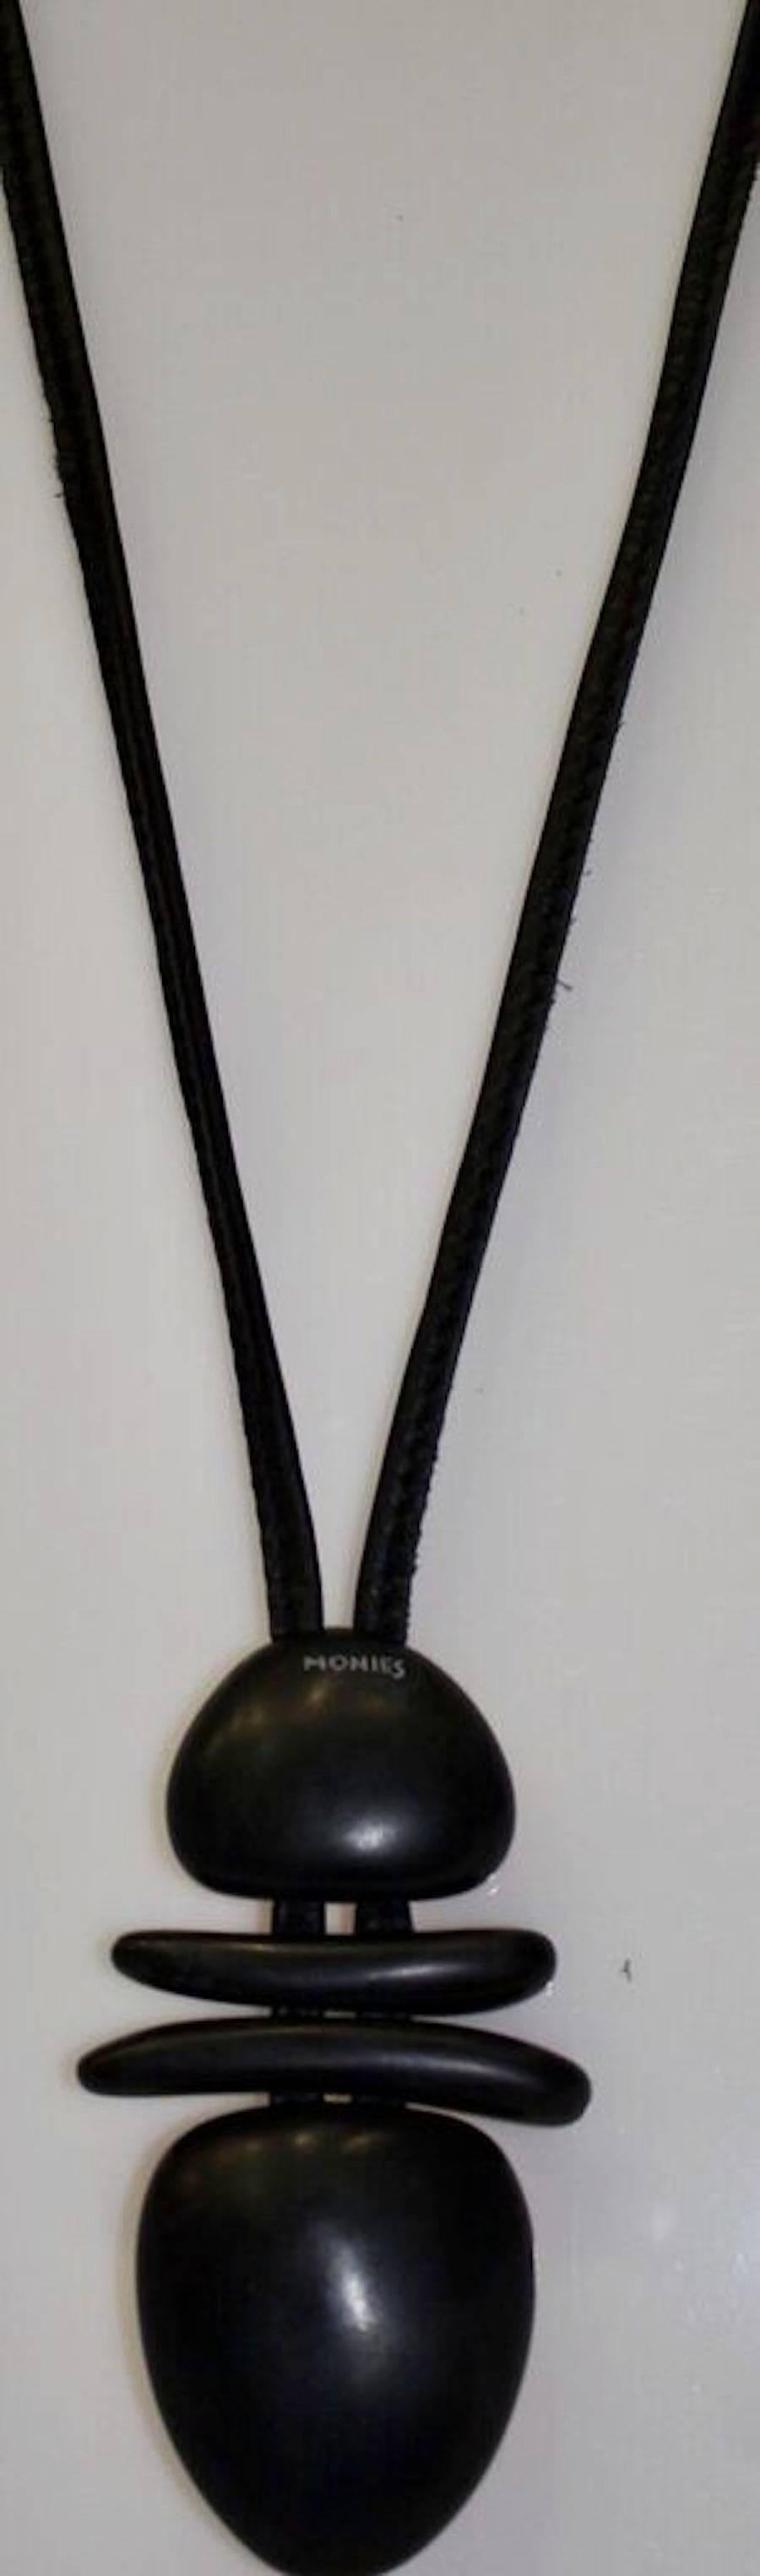 Monies Leather, Wood, and Acrylic Gold Pendant Necklace 1